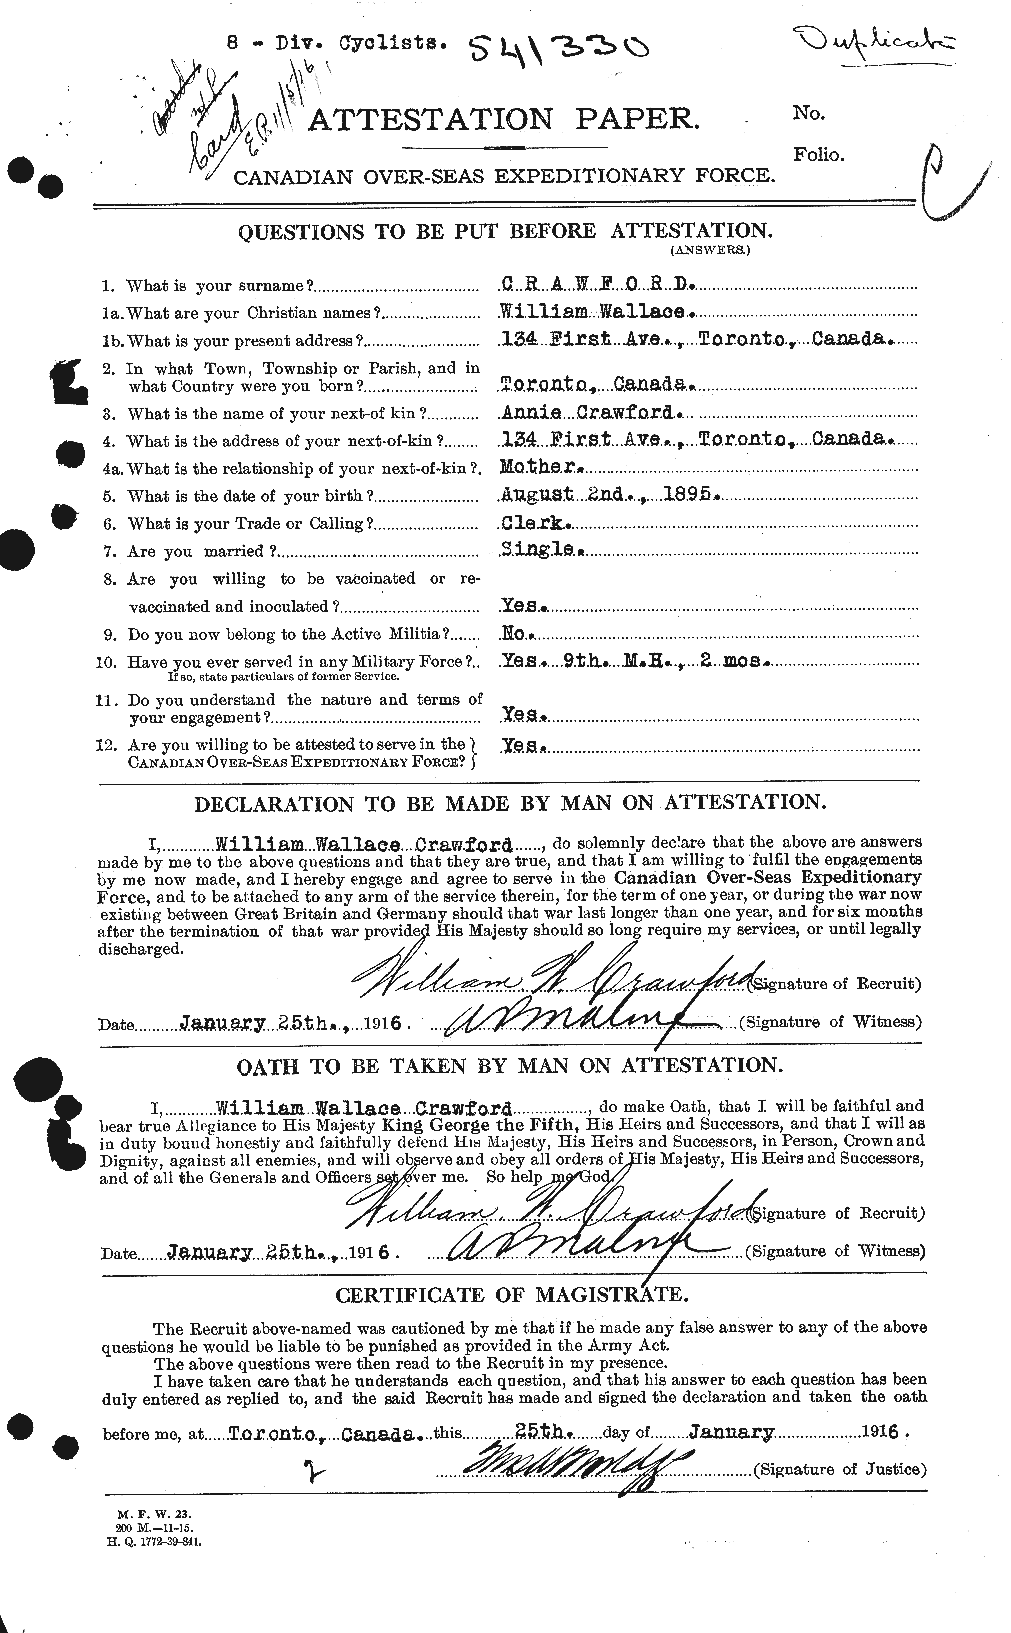 Personnel Records of the First World War - CEF 060683a